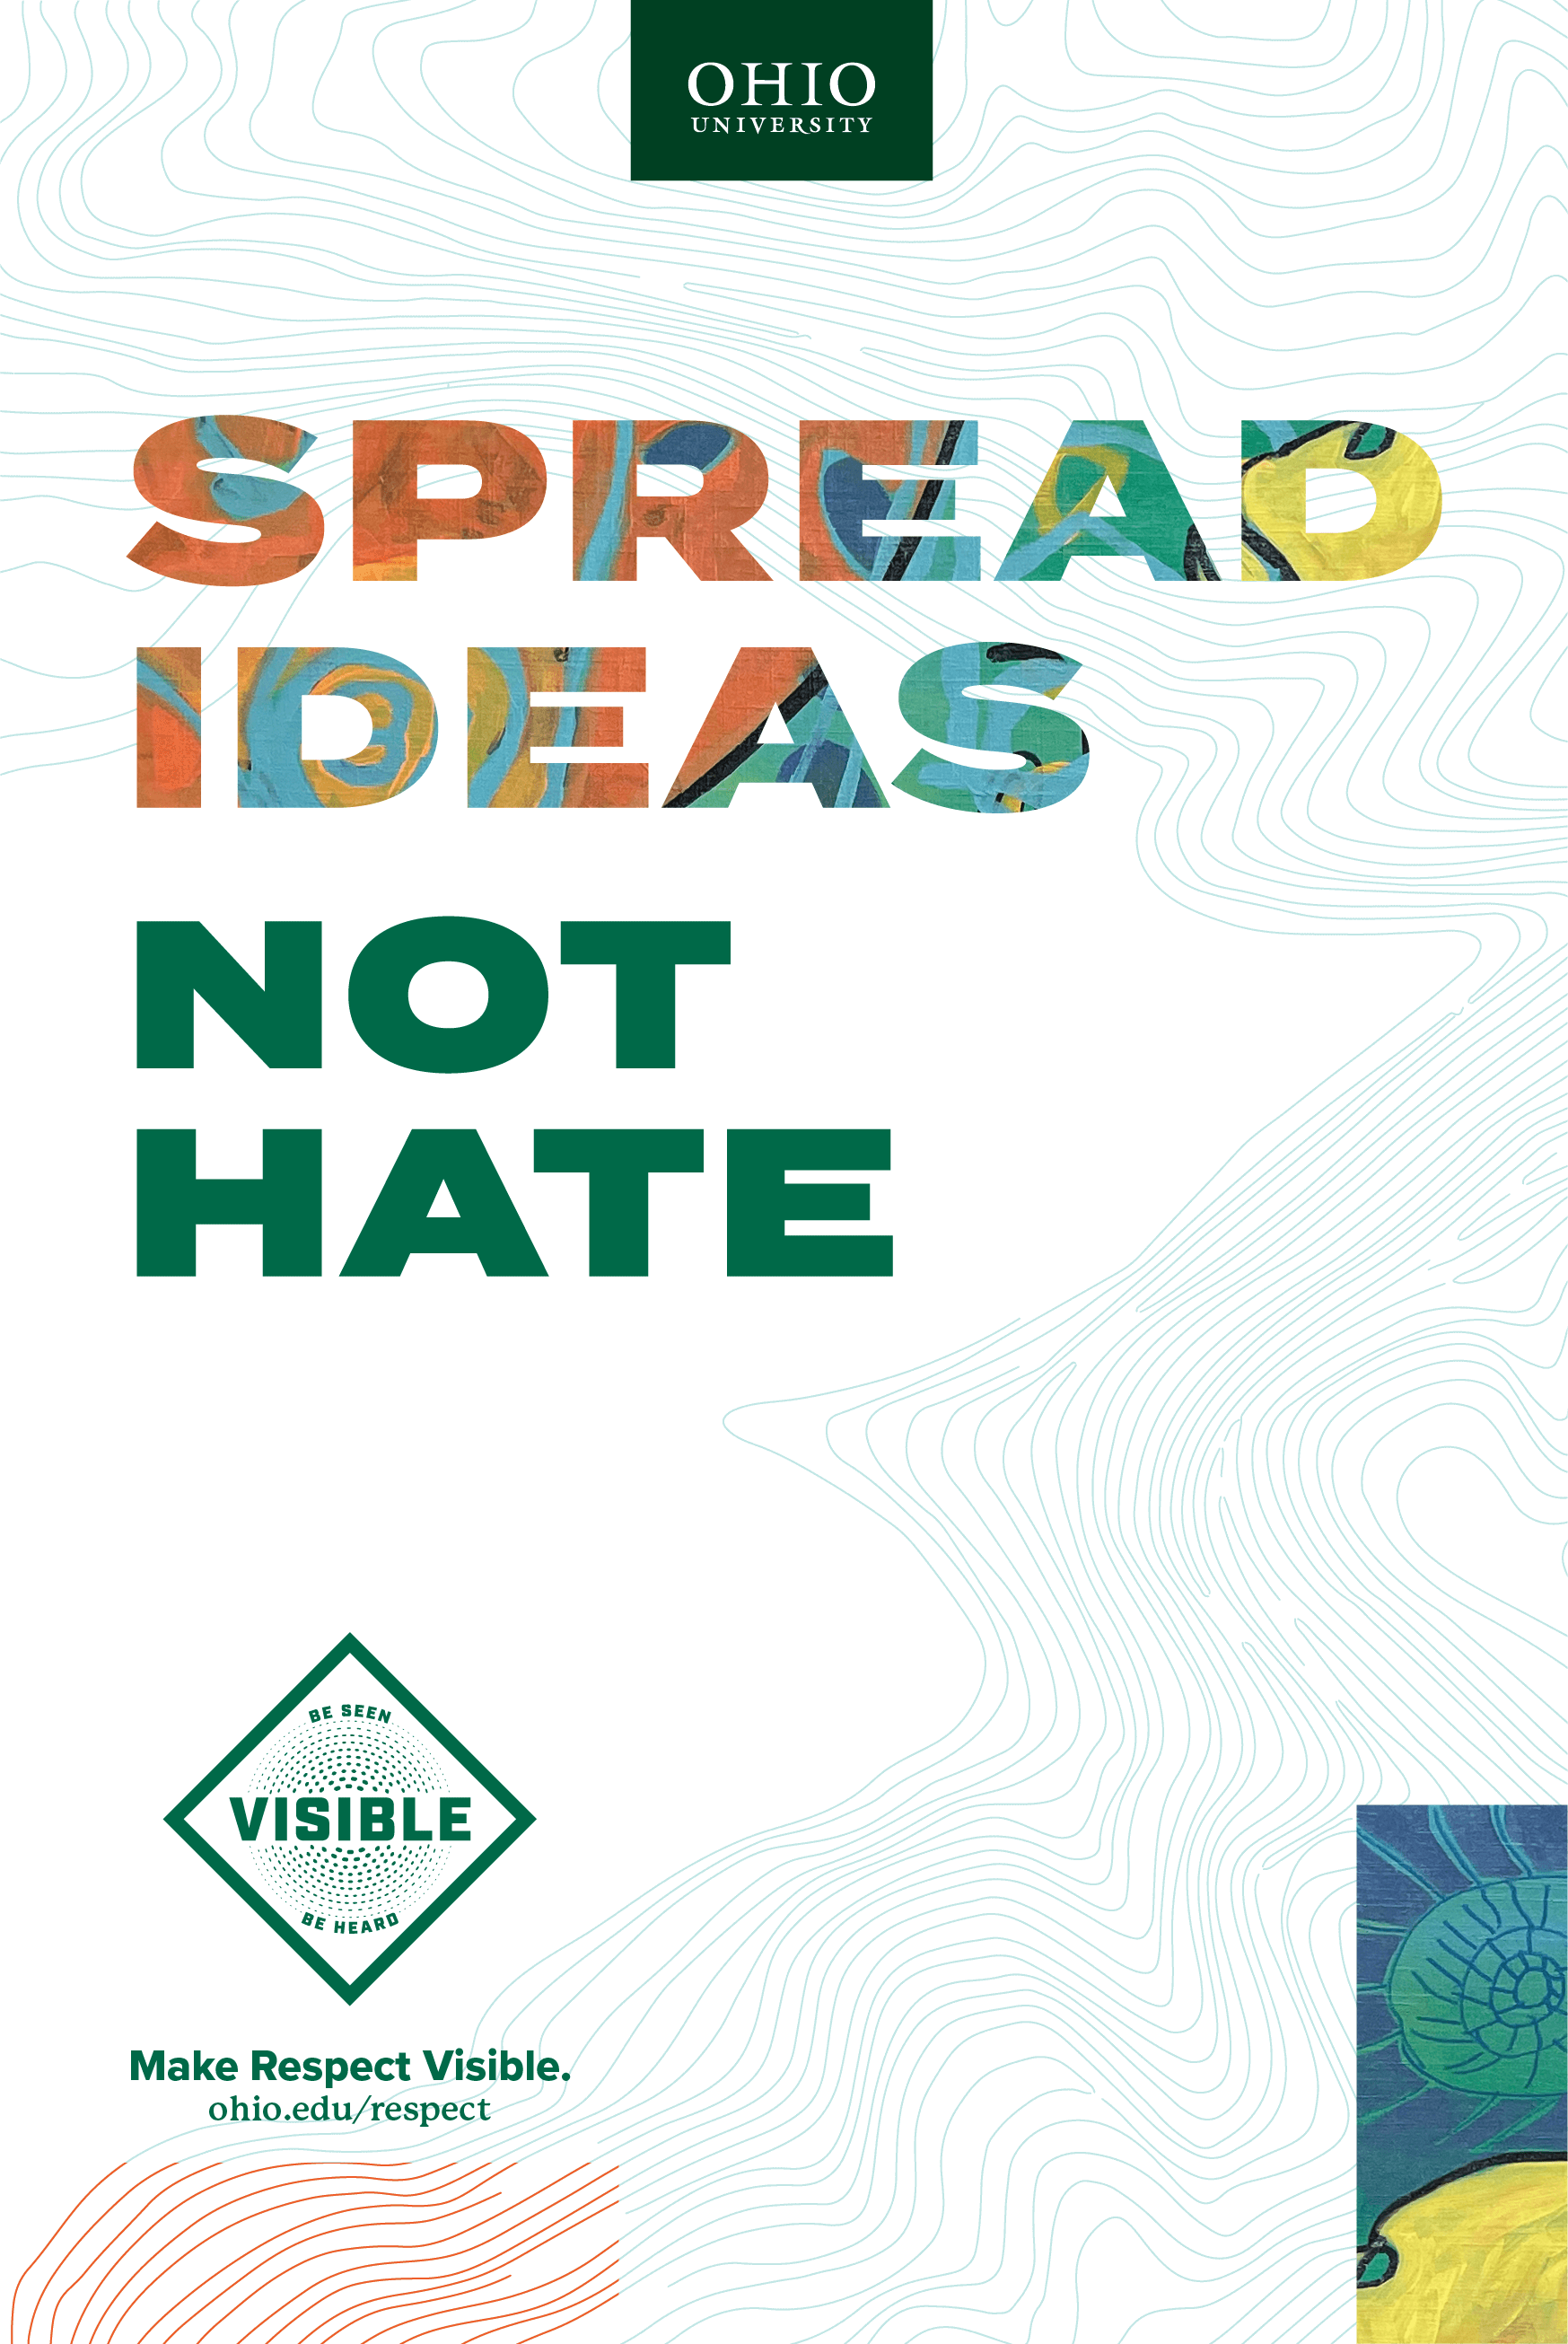 Image of the Spread Ideas Make Respect Visible poster